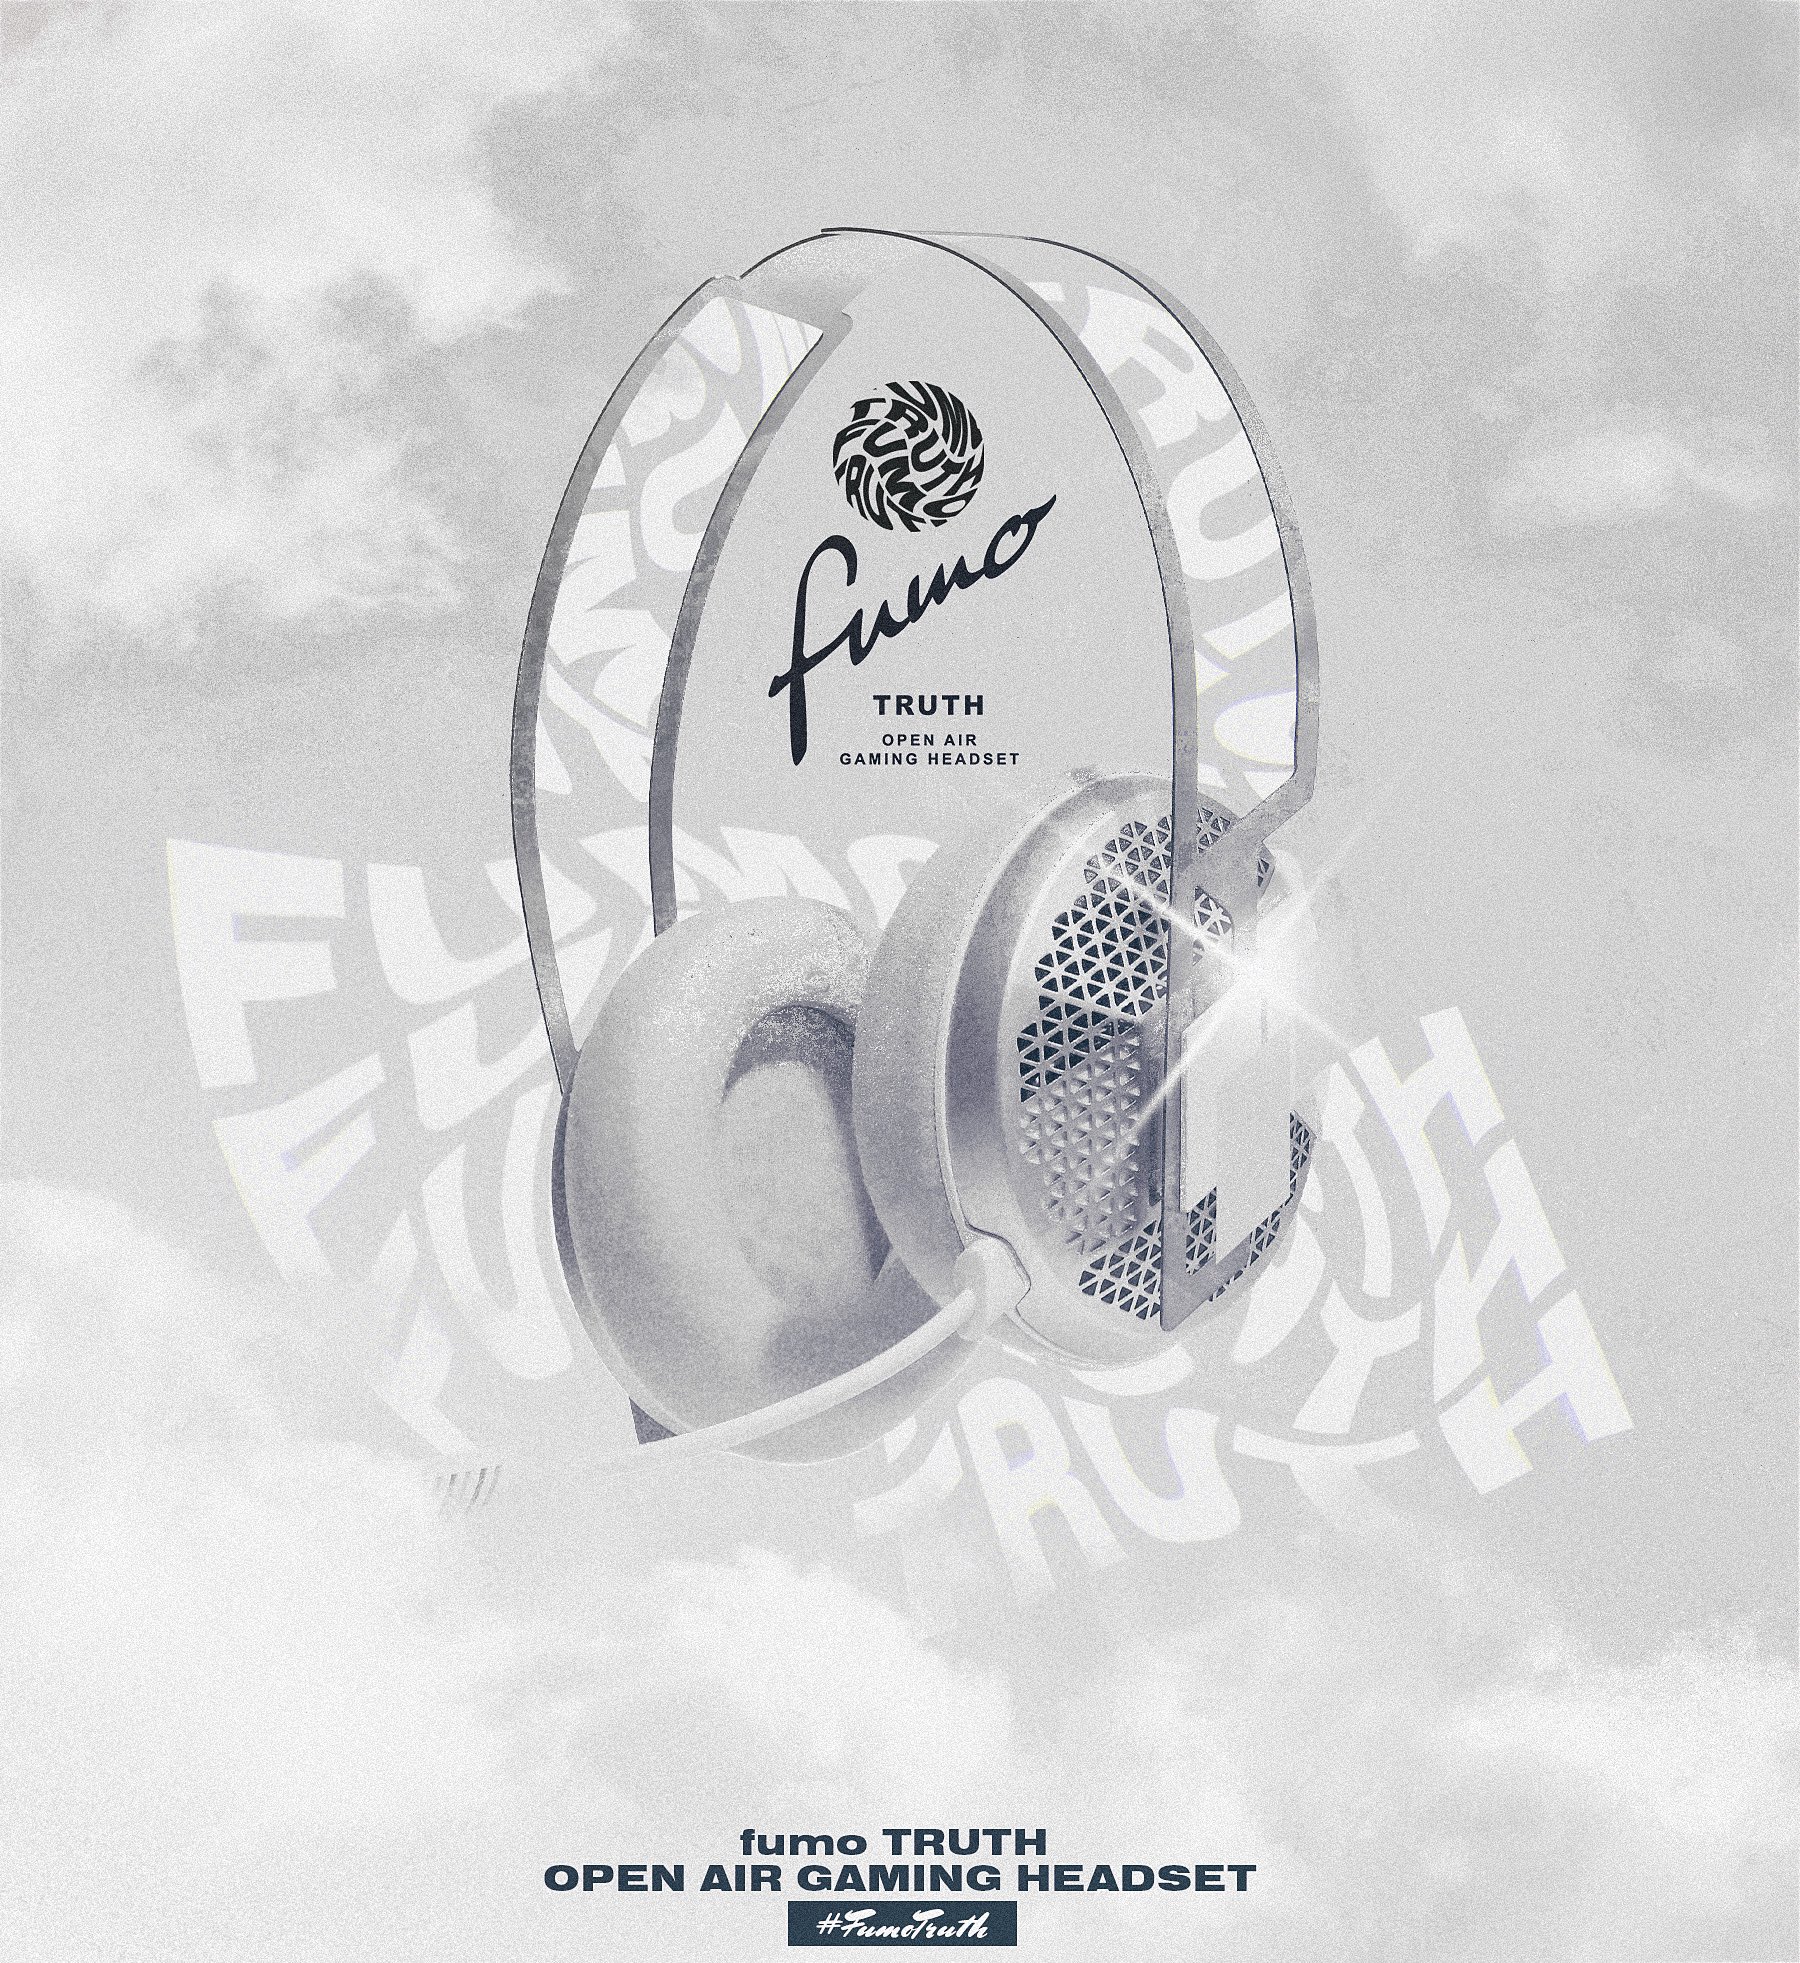 fumo TRUTH Open Air Gaming Headset (@fumo_TRUTH) / Twitter